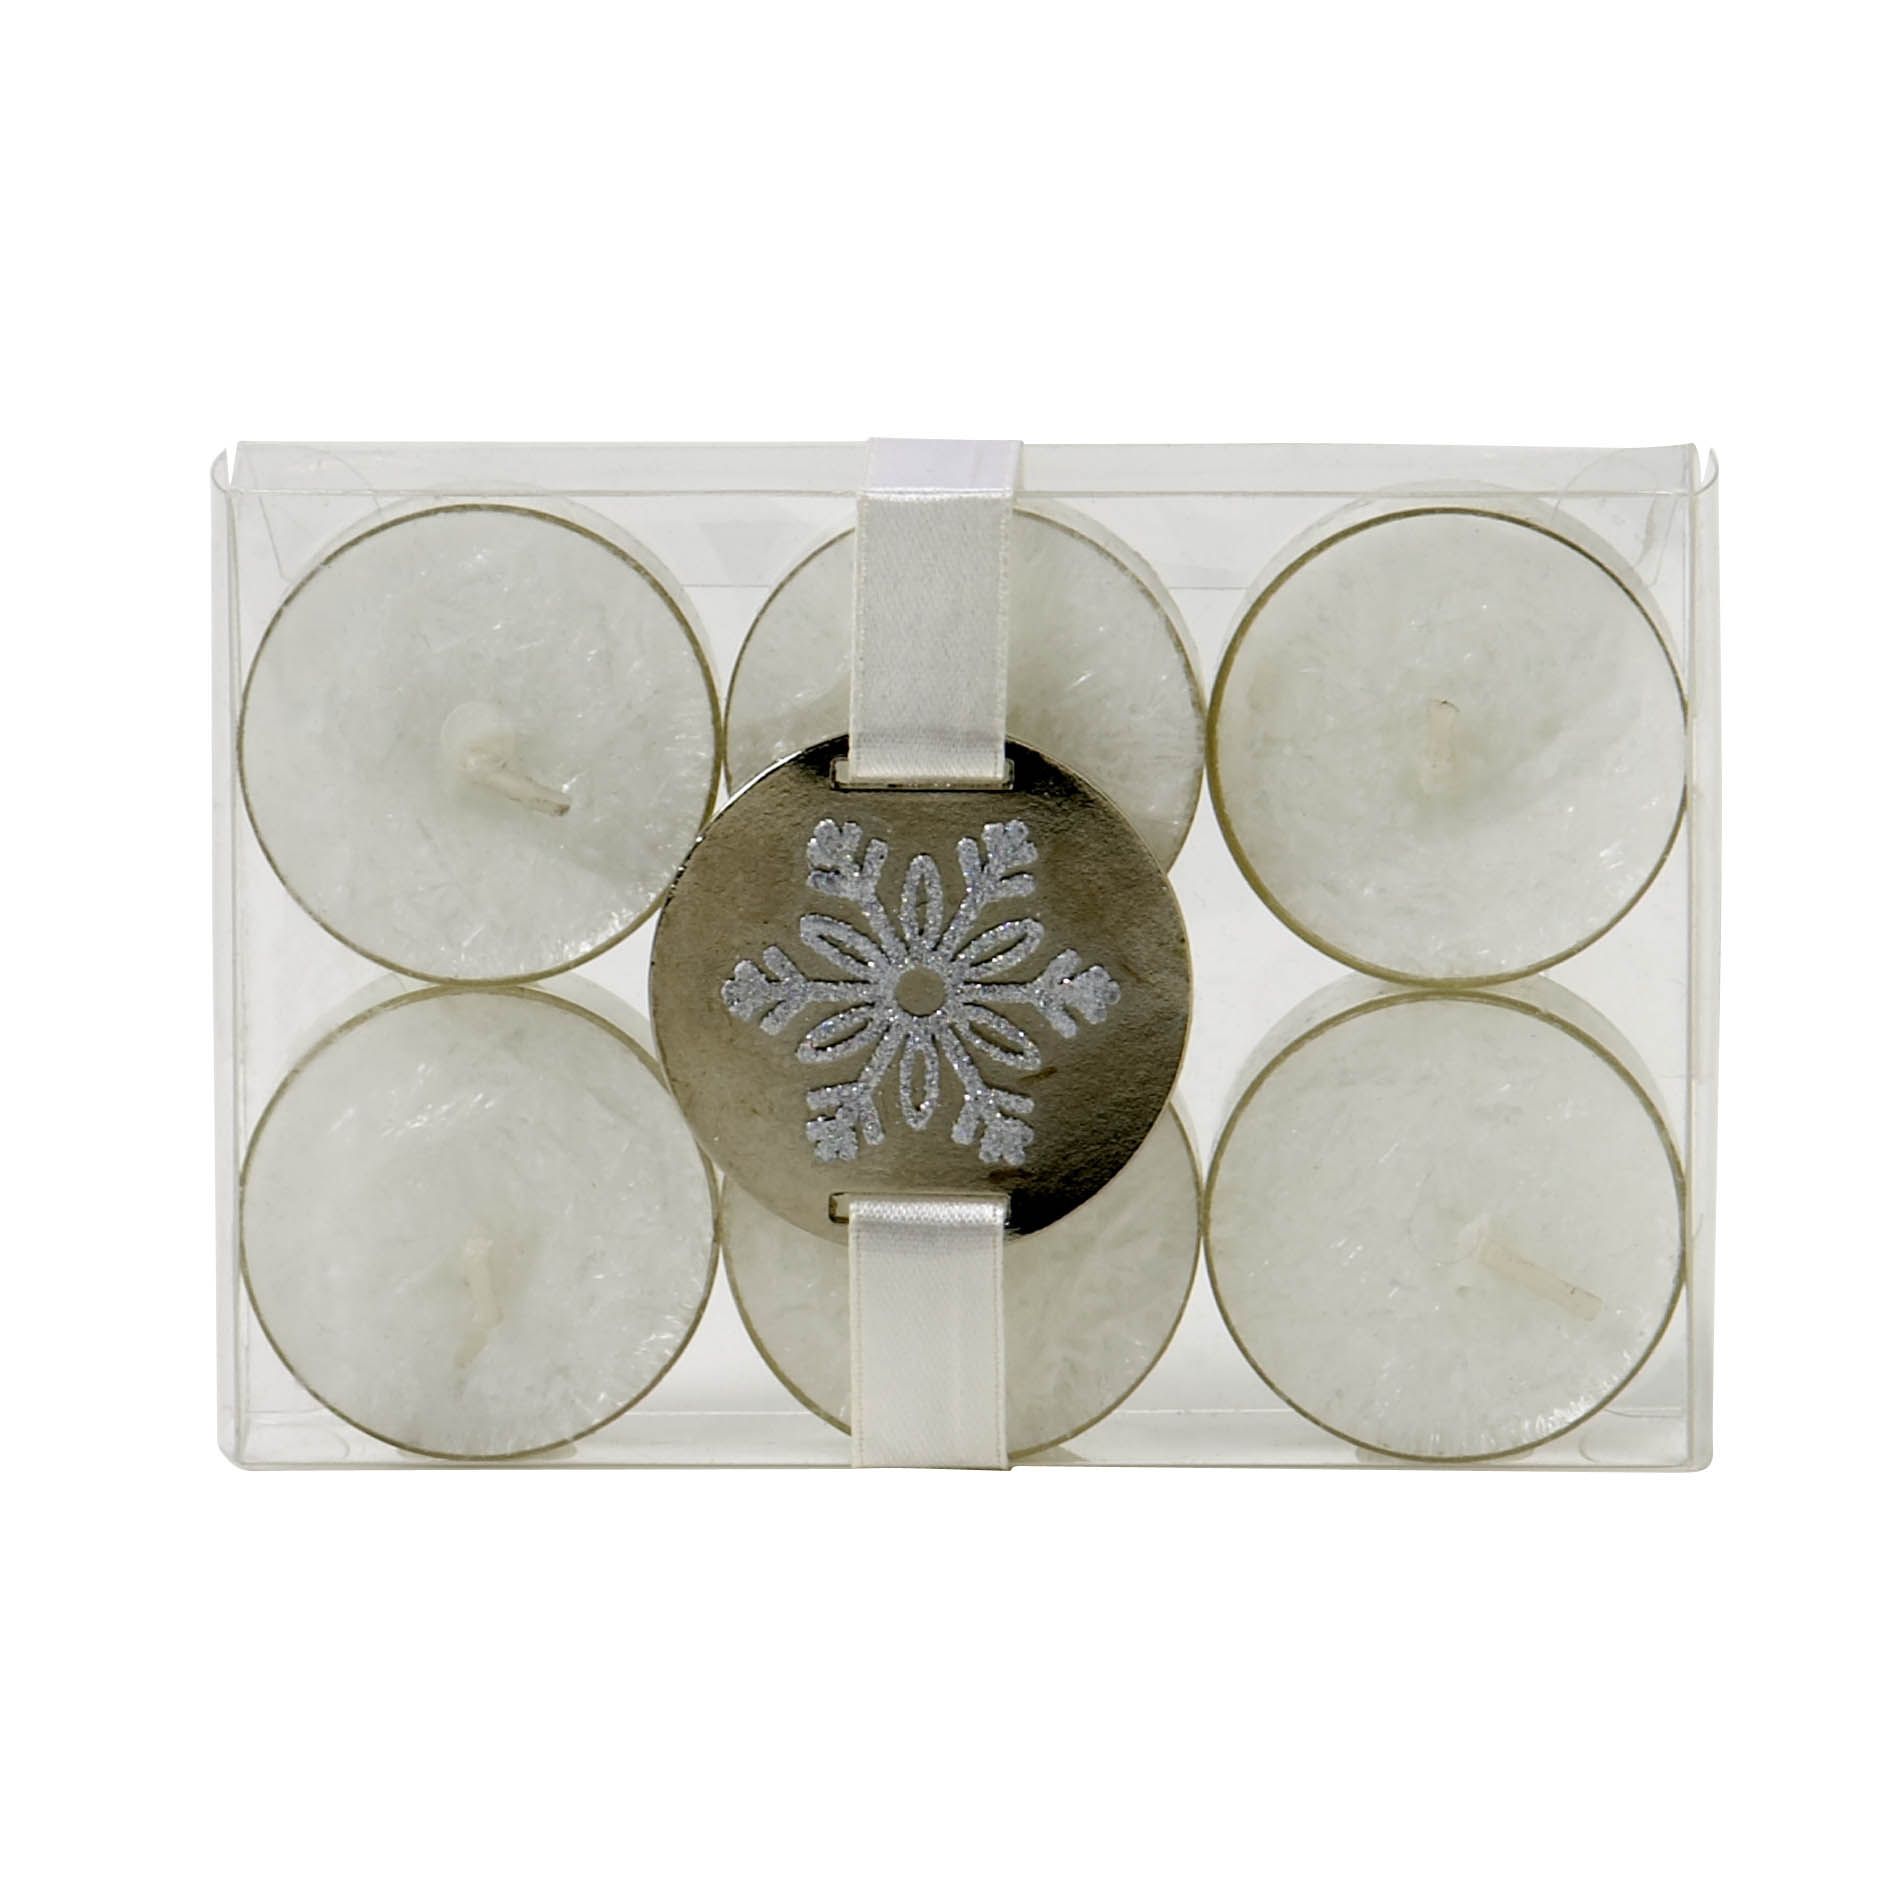 Crystalized White Vanilla And Cinnamon Scented Tealight Candles  Set Of 6